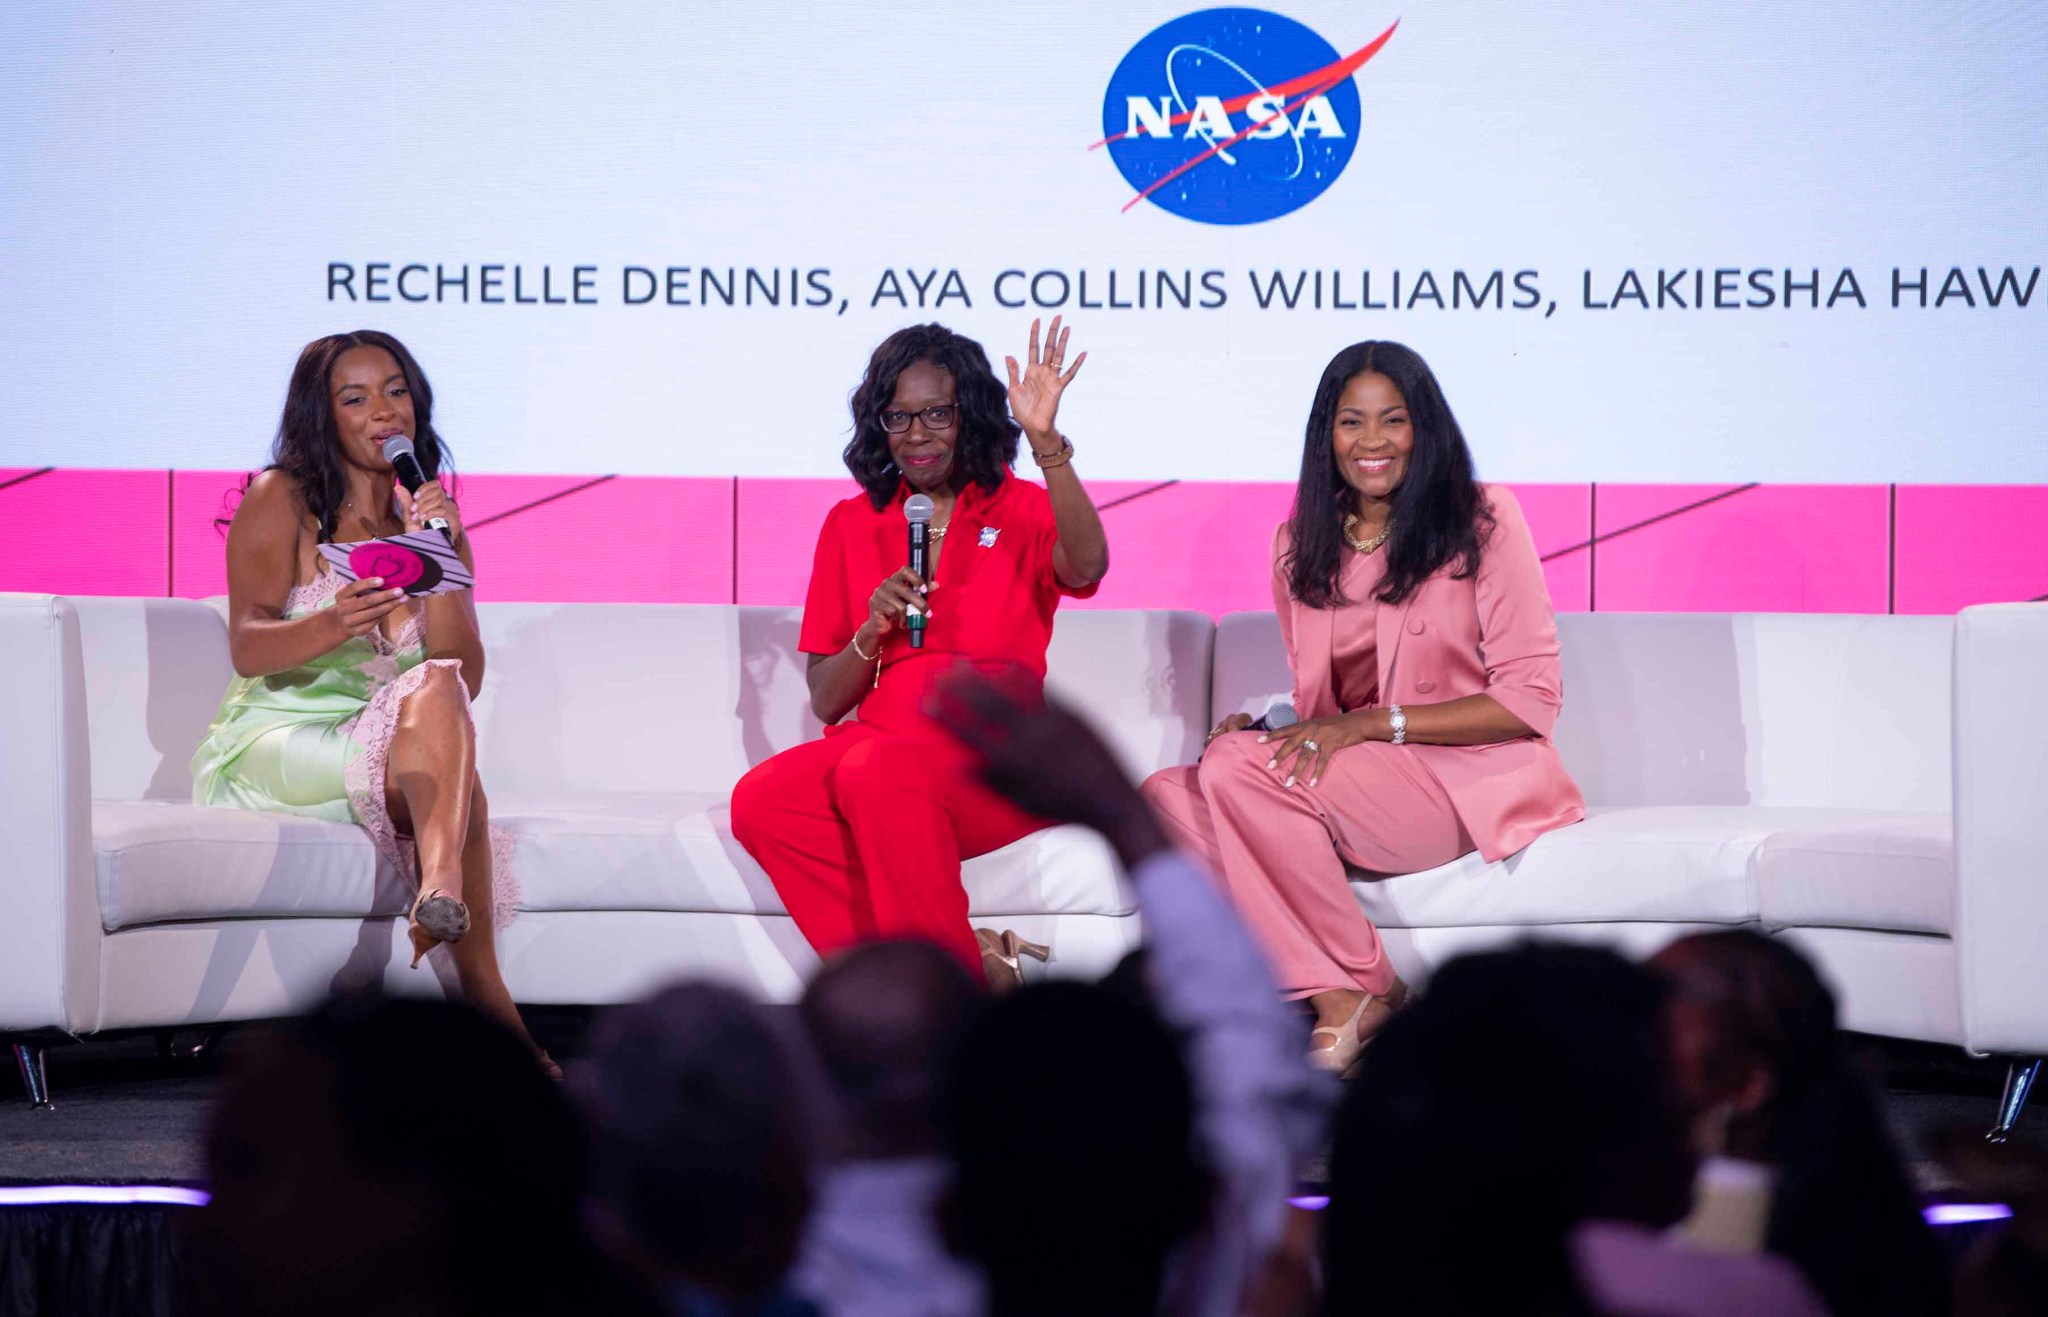 A 3-member panelists of women sit on a white sofa to lead Taking Up Space conversation at Essence Fest; The NASA meatball can be seen on the screen in the background